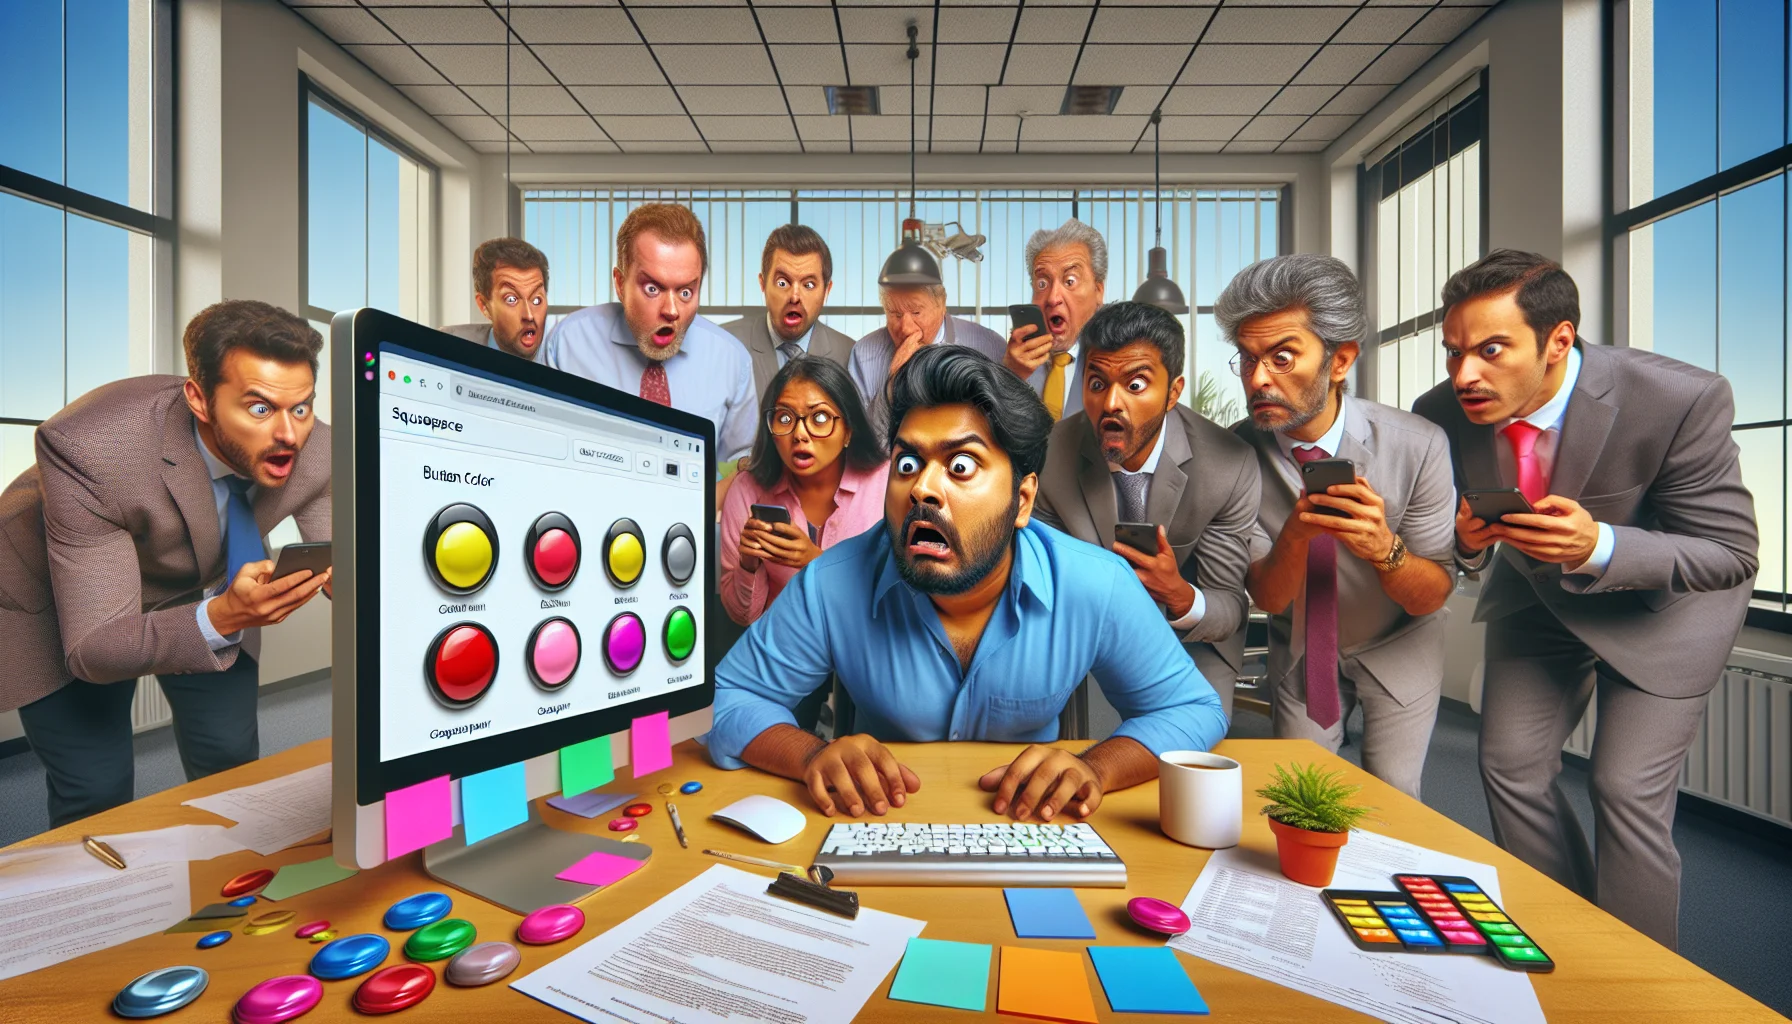 Create a detailed and humorous image showcasing the process of changing the button color in a Squarespace web hosting context. Set it in an office environment, where a bewildered South Asian male programmer is staring at his computer screen. On the screen is a graphical representation of a Squarespace website with large garishly colored buttons. The programmer's desk is cluttered with coffee cups, notes, and multiple handheld devices each showing different button colors. Around him, Hispanic and Middle-Eastern coworkers are looking on with amusement and curiosity, adding to the comic effect of the situation.